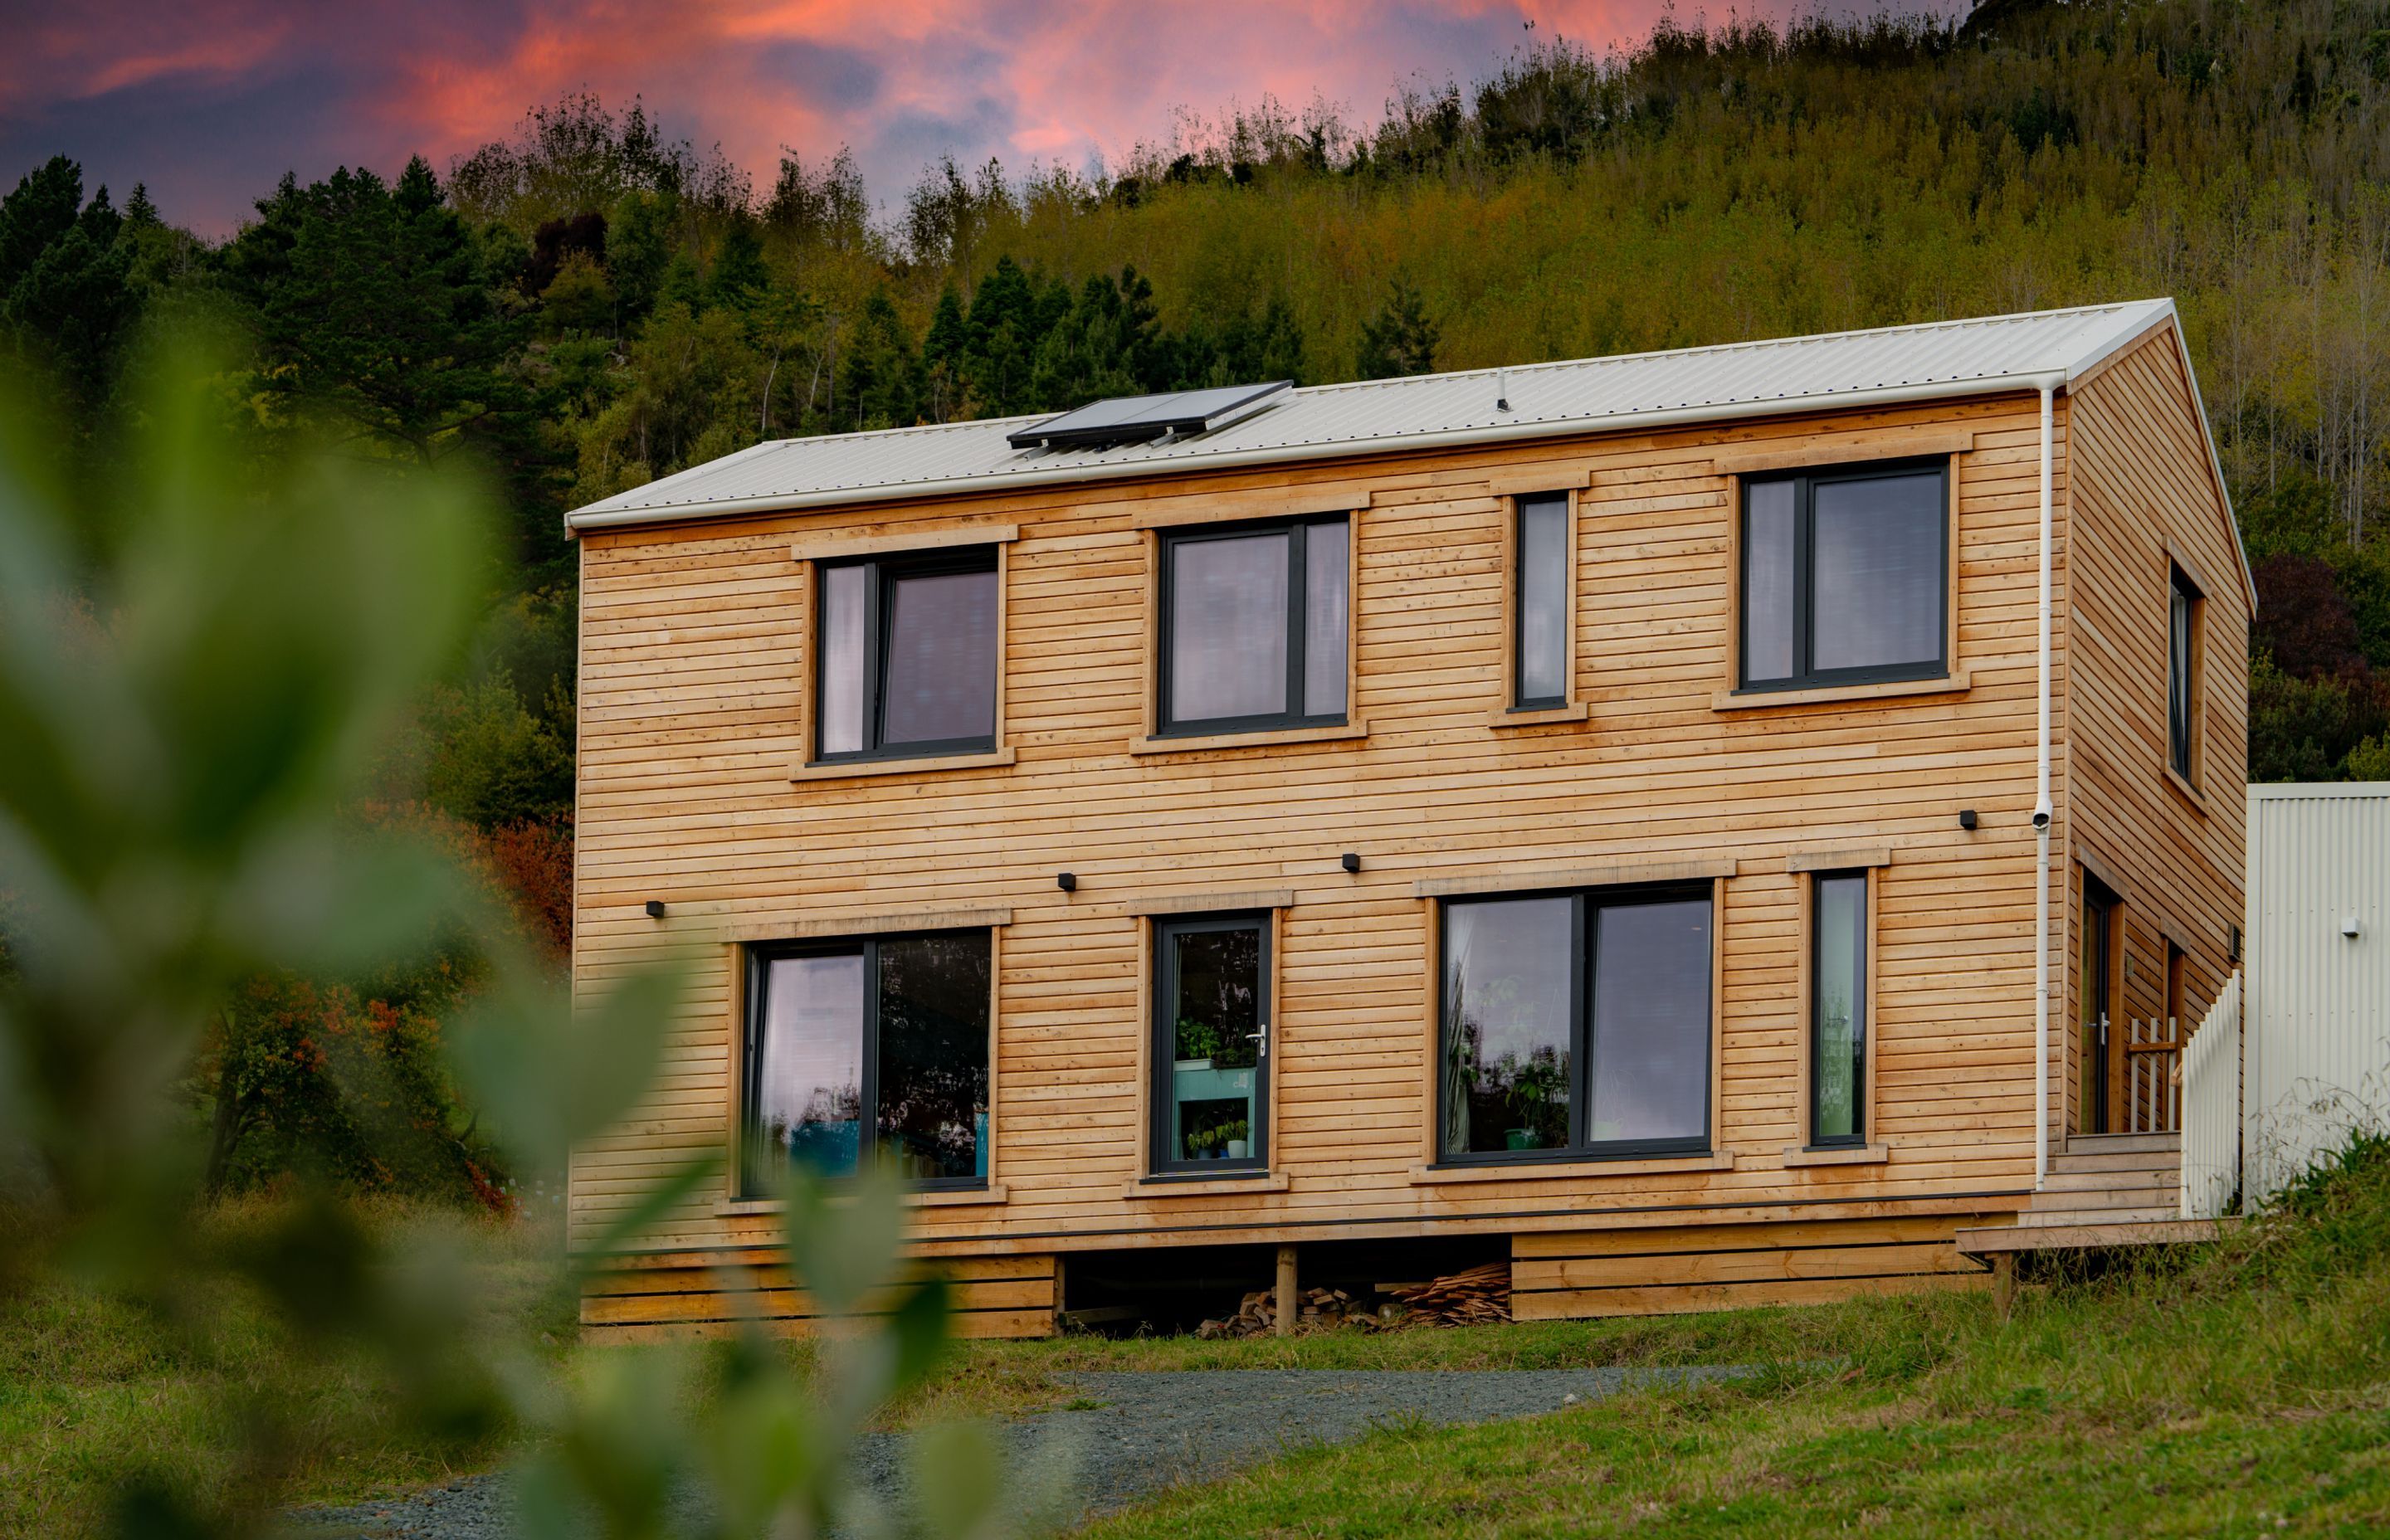 The home is clad in macrocarpa weatherboards harvested and milled only 45 minutes down the road.